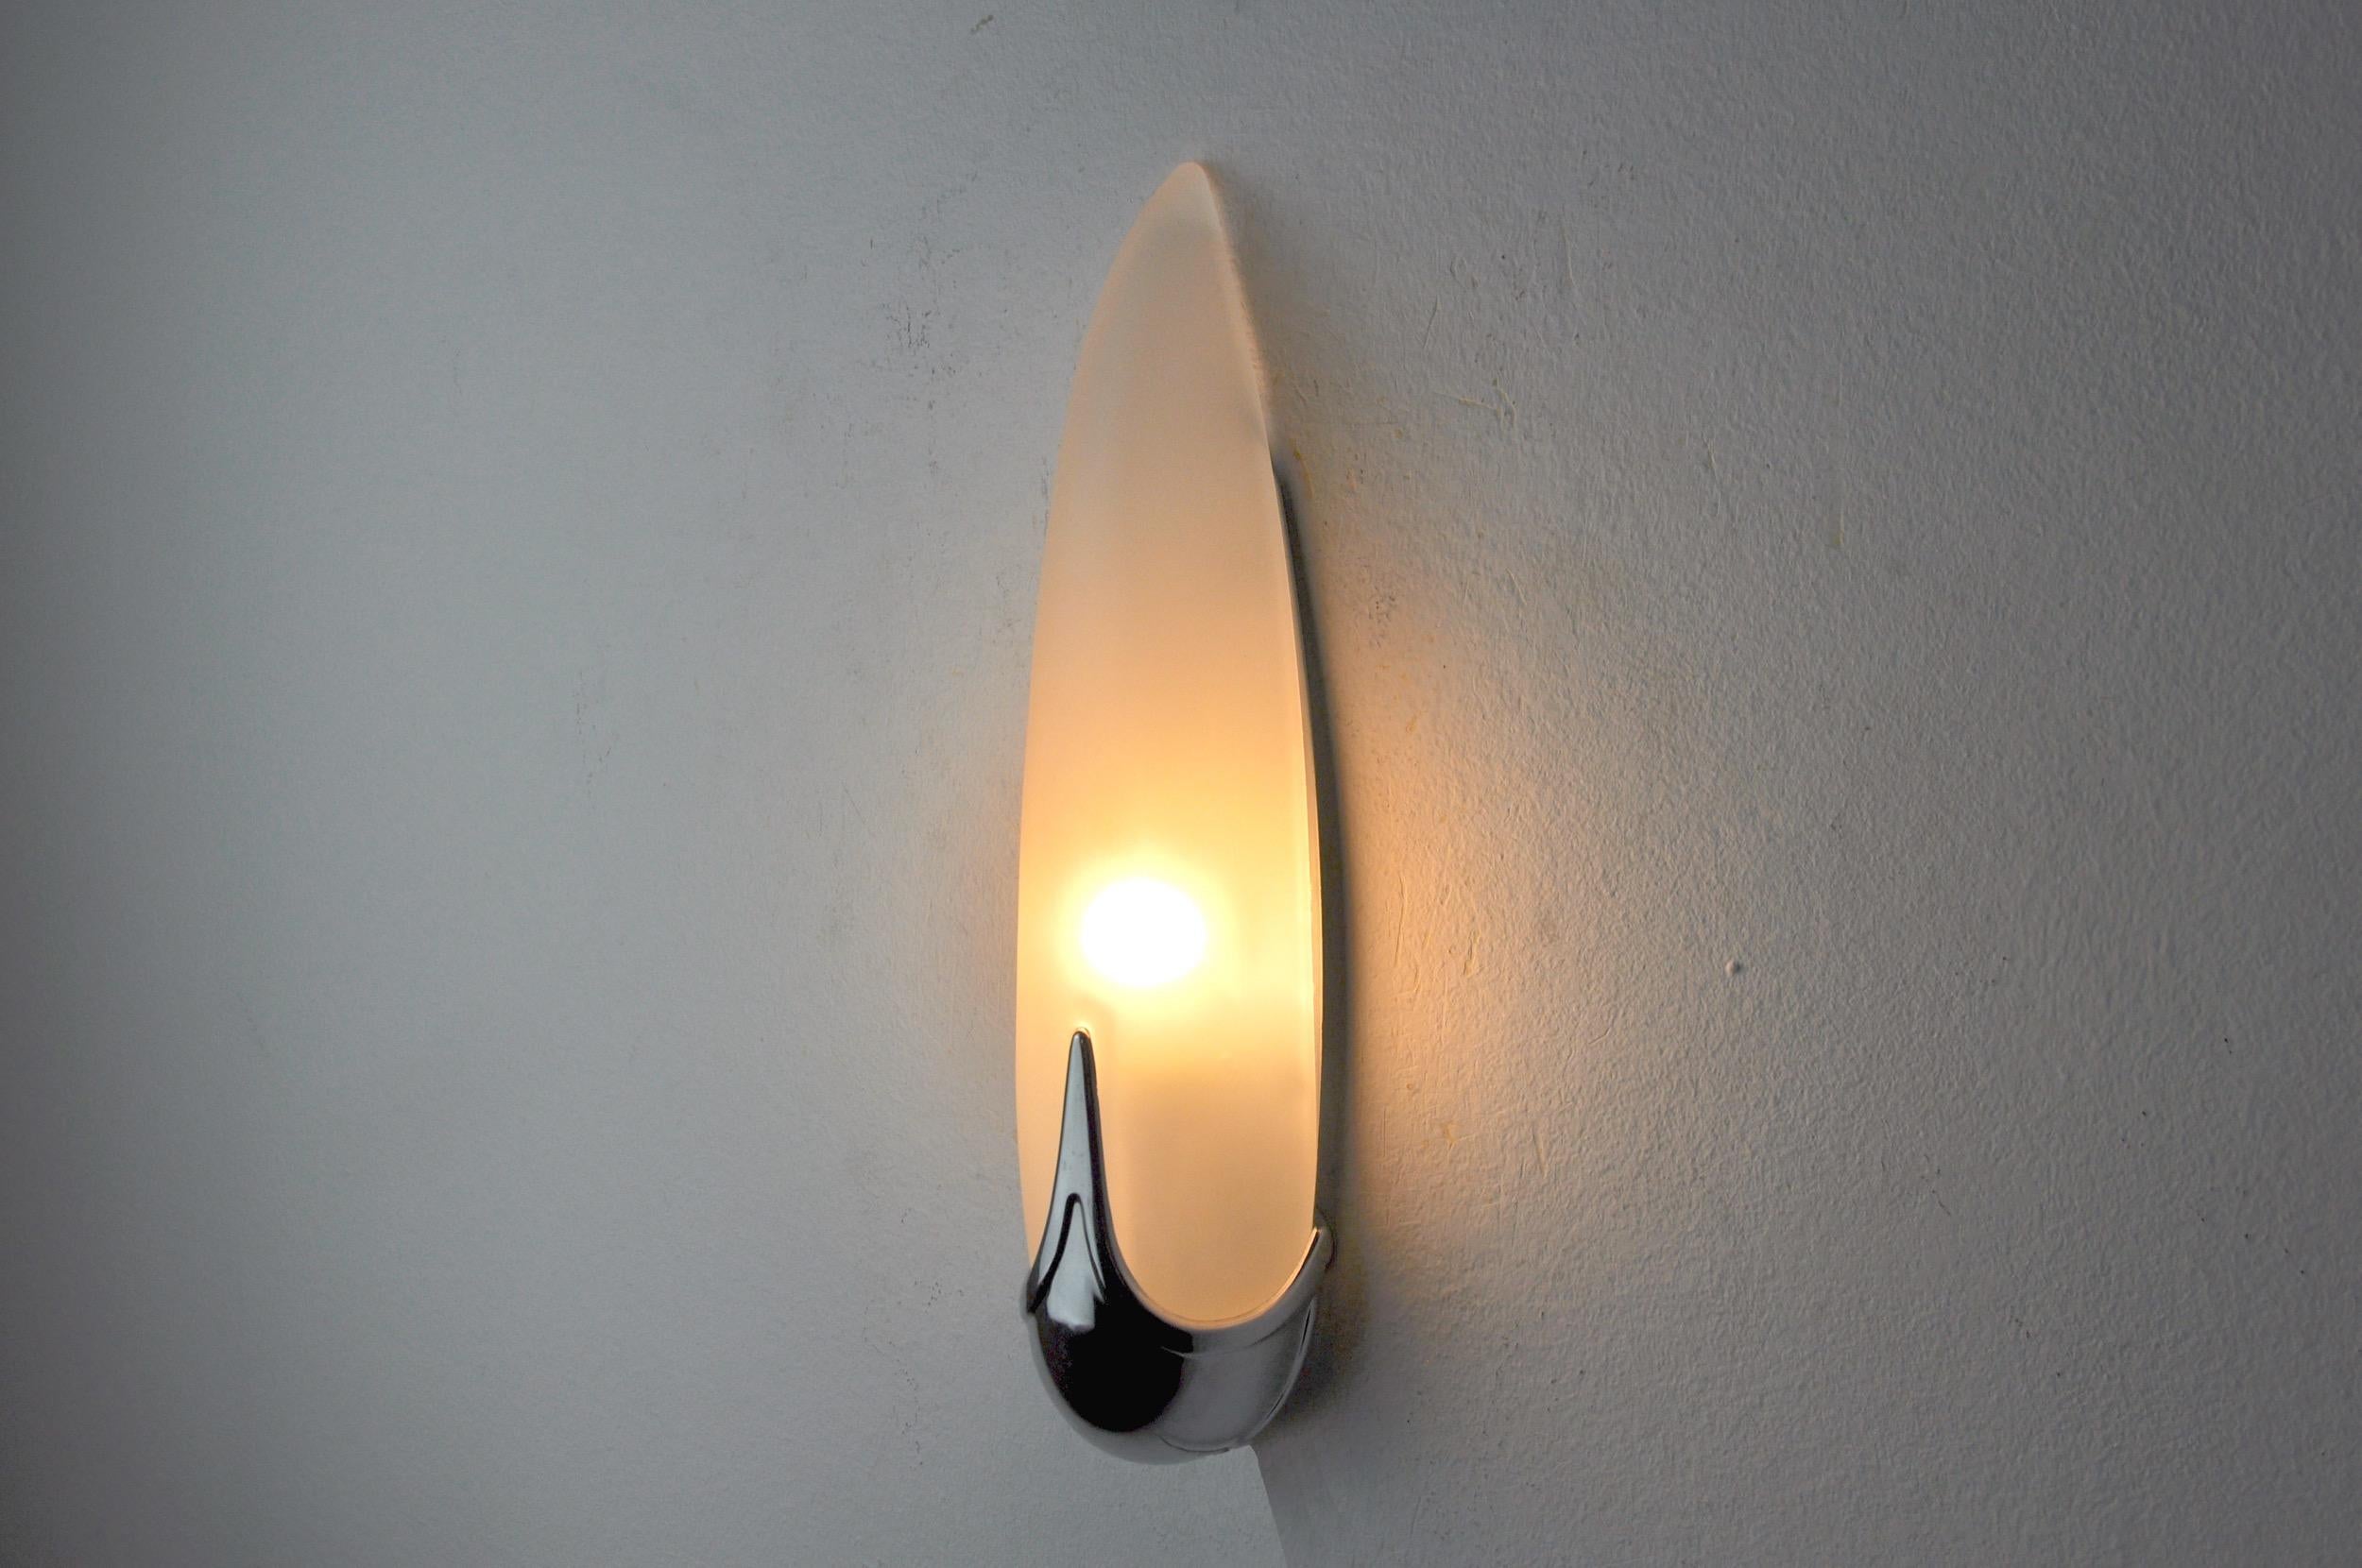 Very beautiful idearte wall lamp designed and produced in spain in the 80s.

Smoked glass and silver metal structure in the shape of ears.

Unique design object that will illuminate wonderfully and bring a real design touch to your